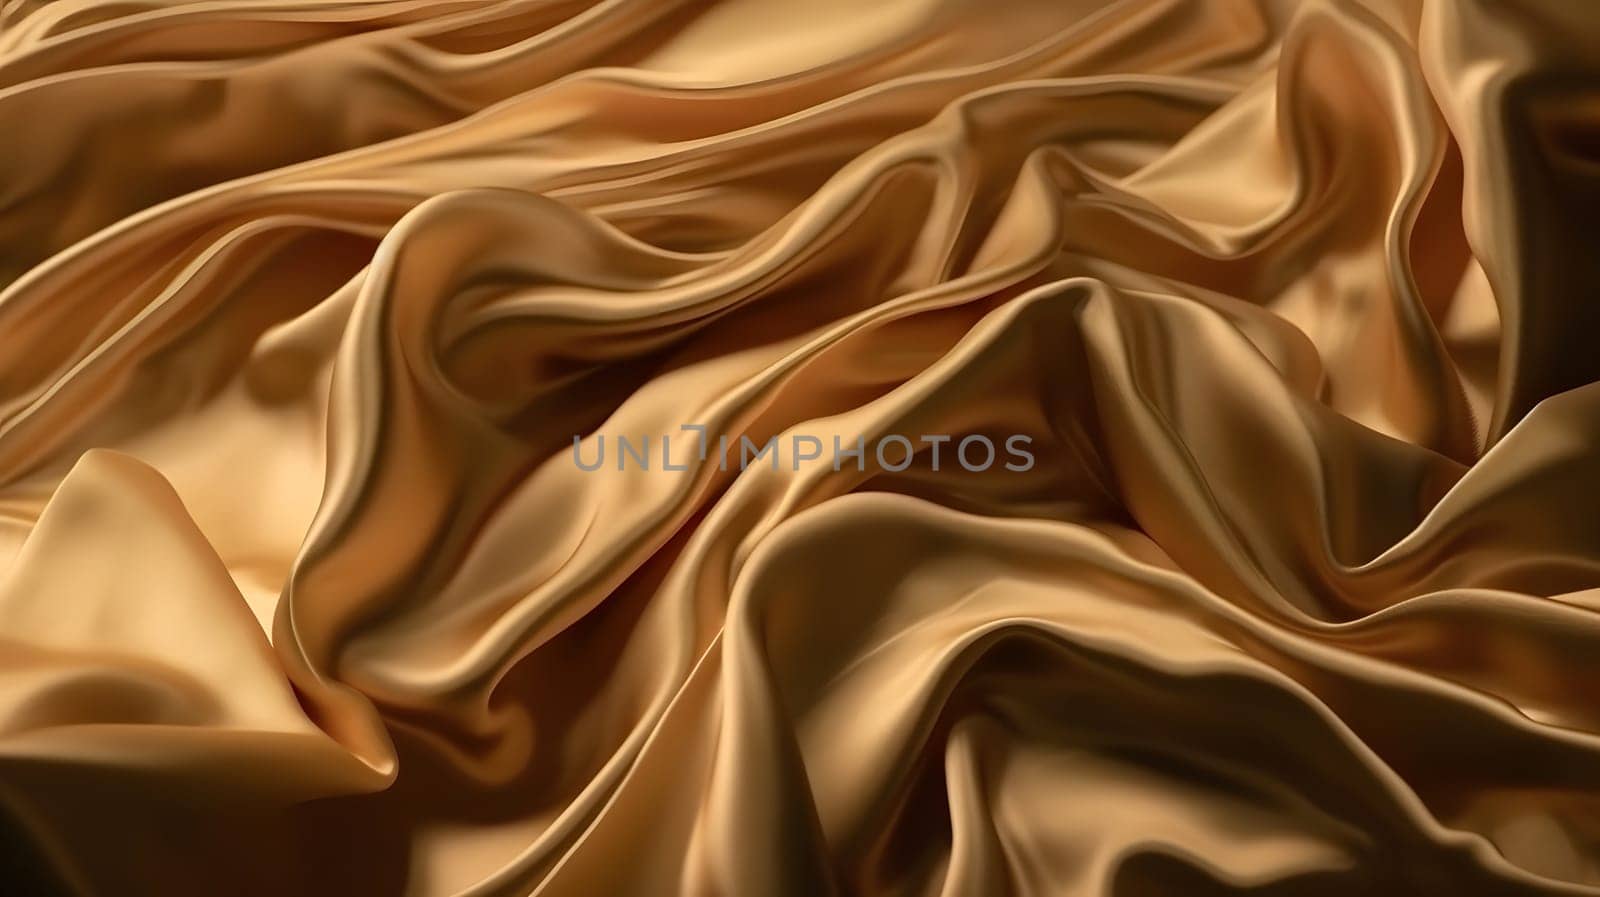 Golden-colored silk surface with folds. Abstract background, neural network generated image by z1b